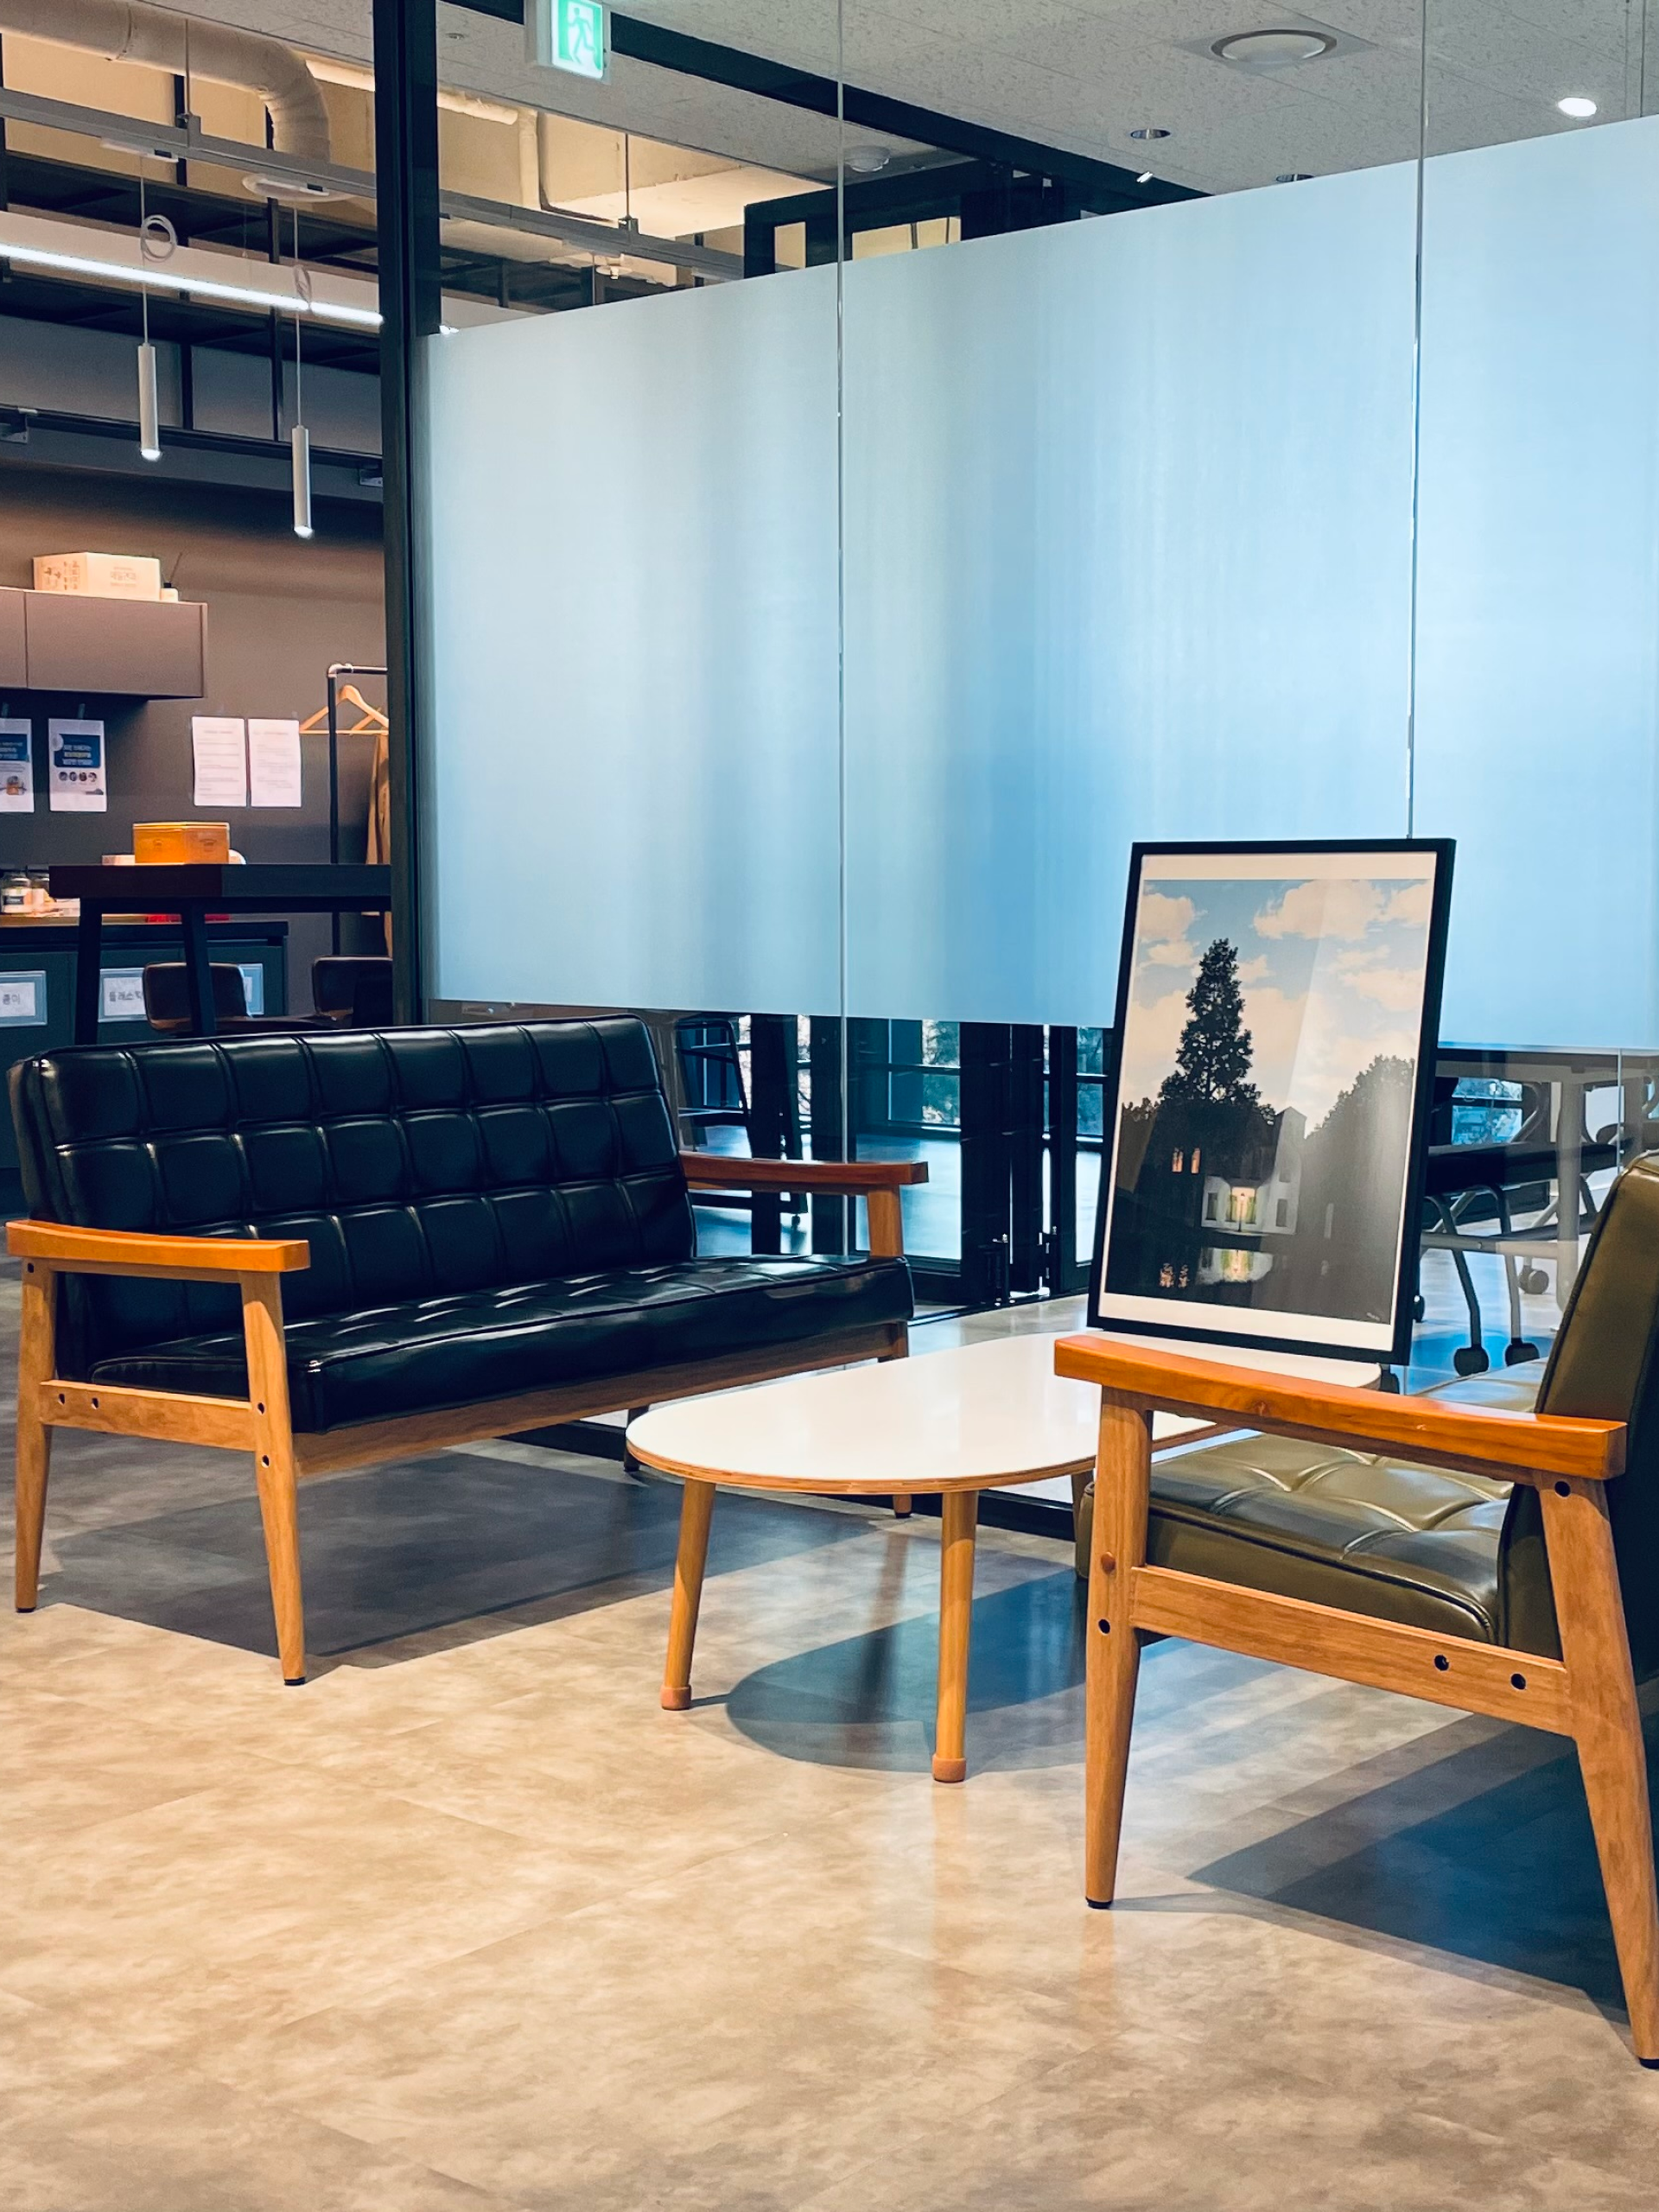 Picture from the inside of the Jung von Matt office building HANGKANG in Seoul. You can see two benches facing each other with a table in the middle. On the table is a picture of a house.